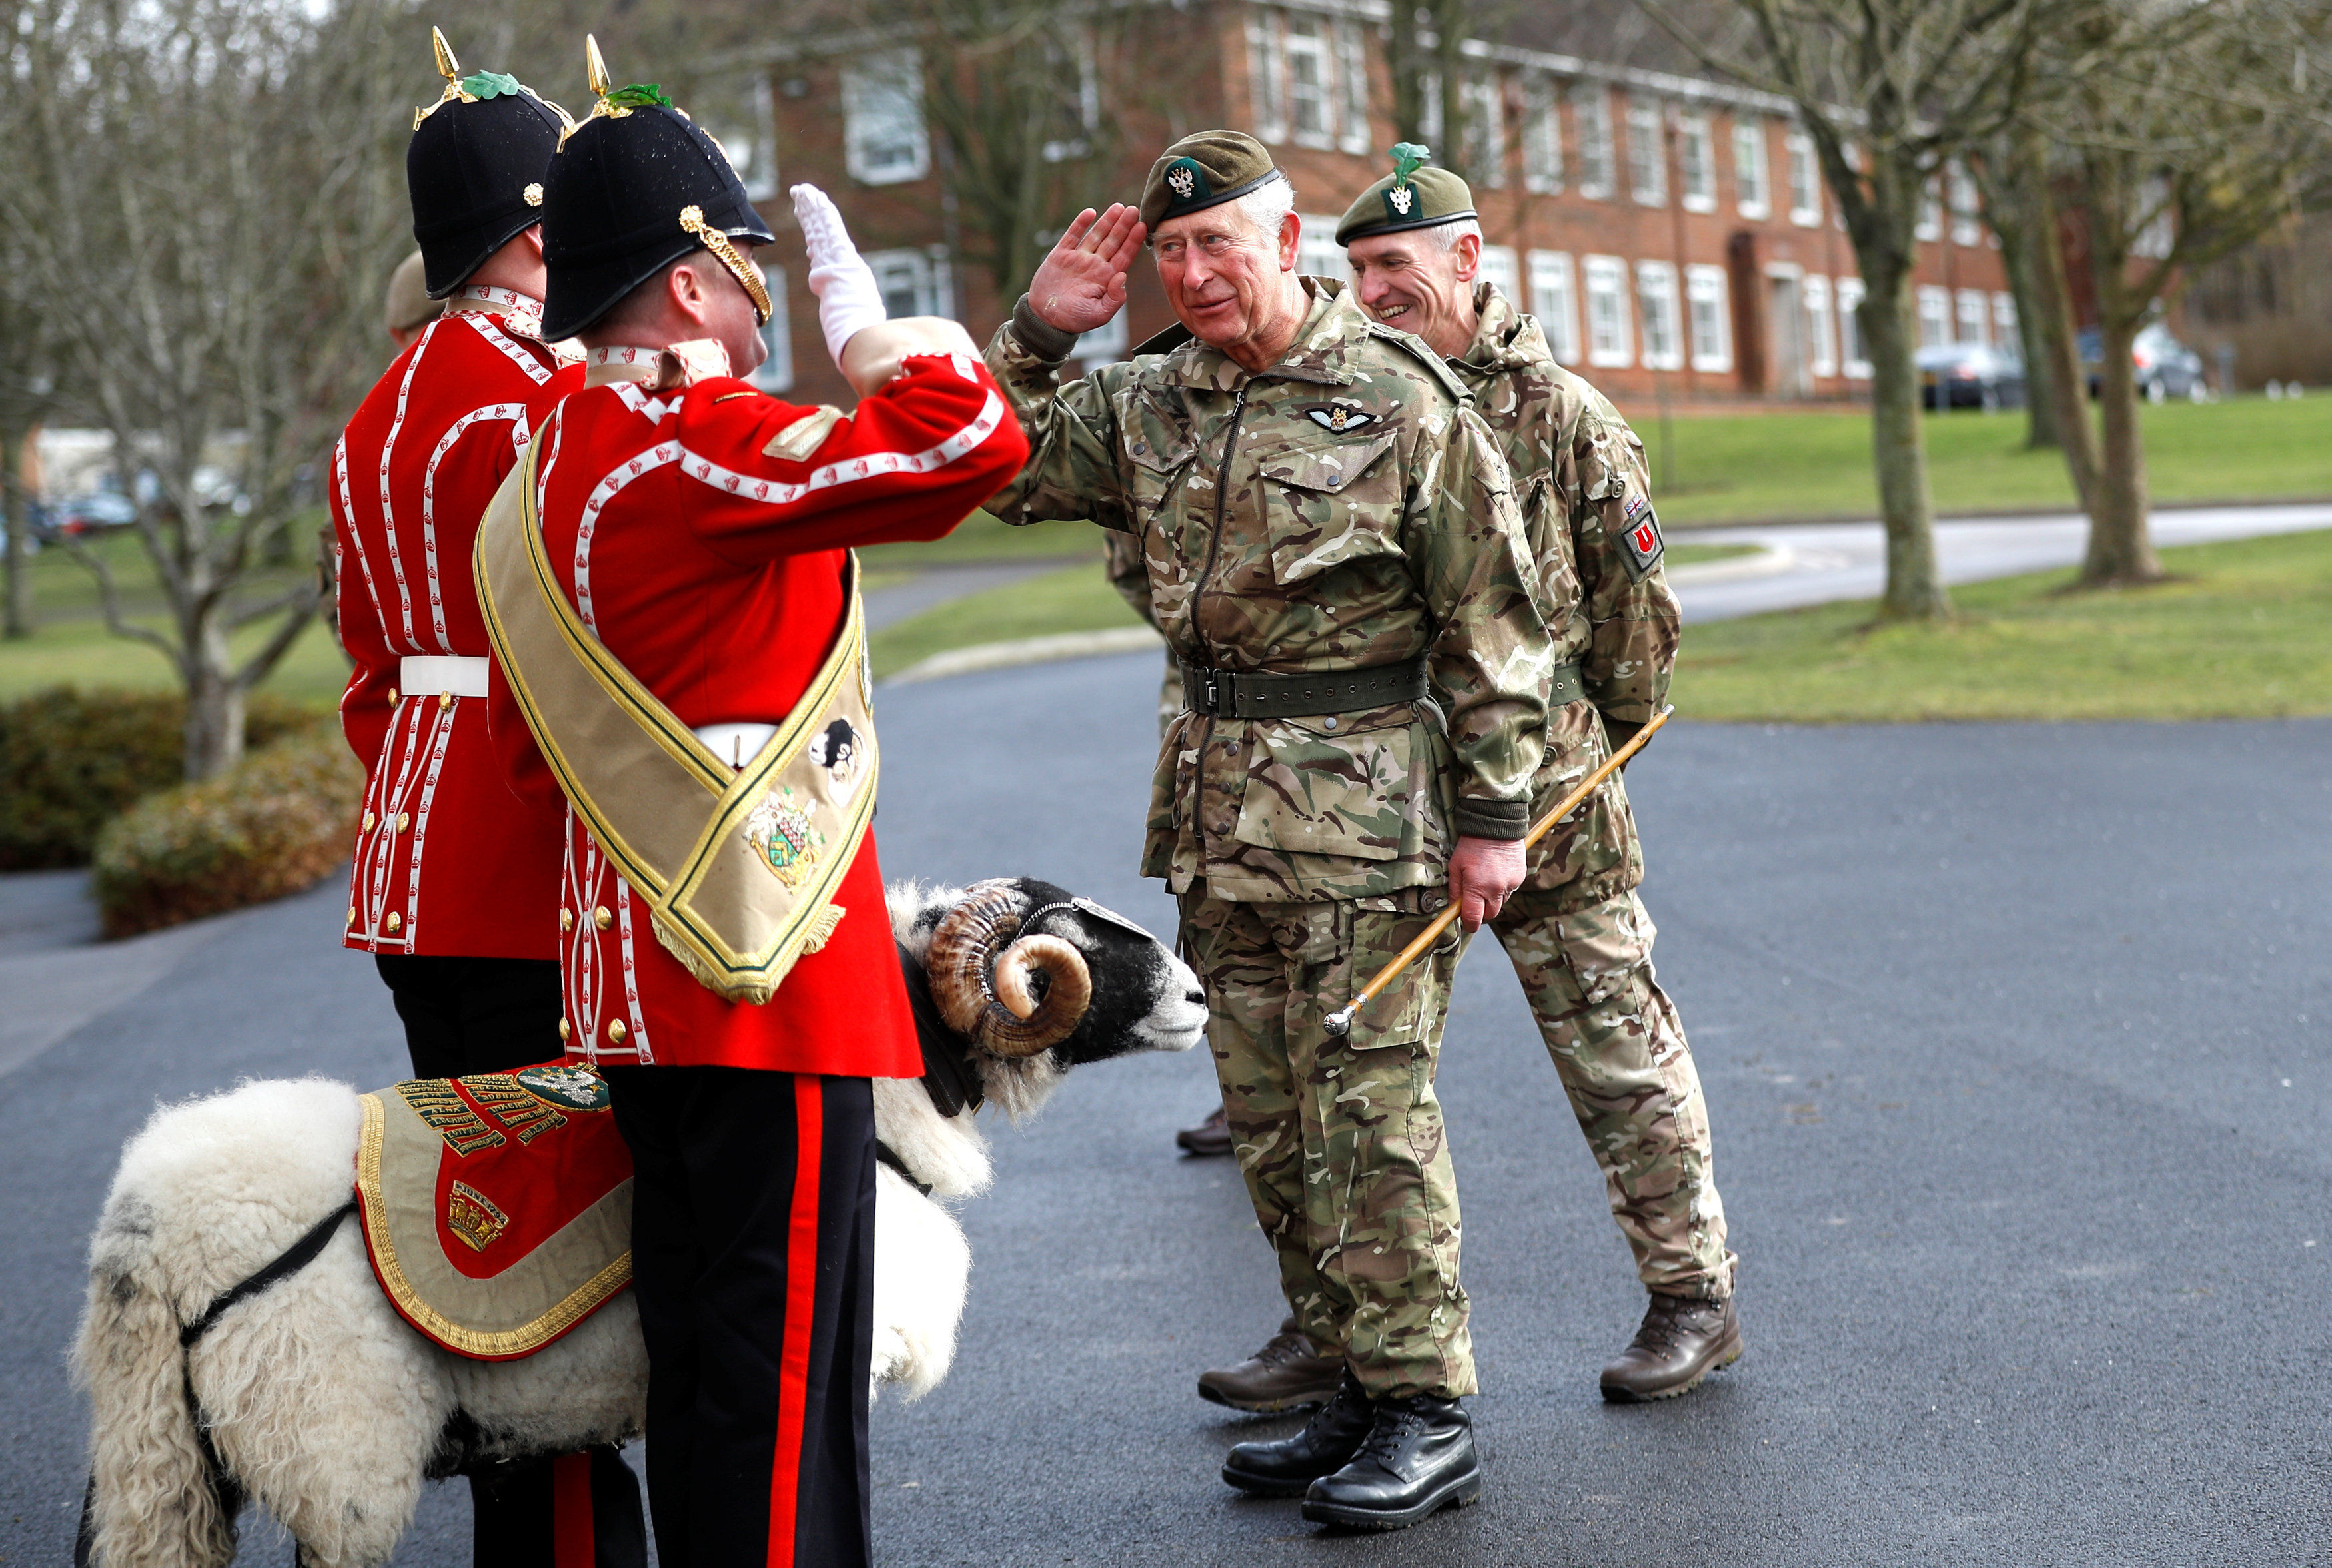 The Prince of Wales inspects troops and meets Private Derby XXII, a Swaledale Ram and the Regimental Mascot during his visit to the 1st Battalion the Mercian Regiment